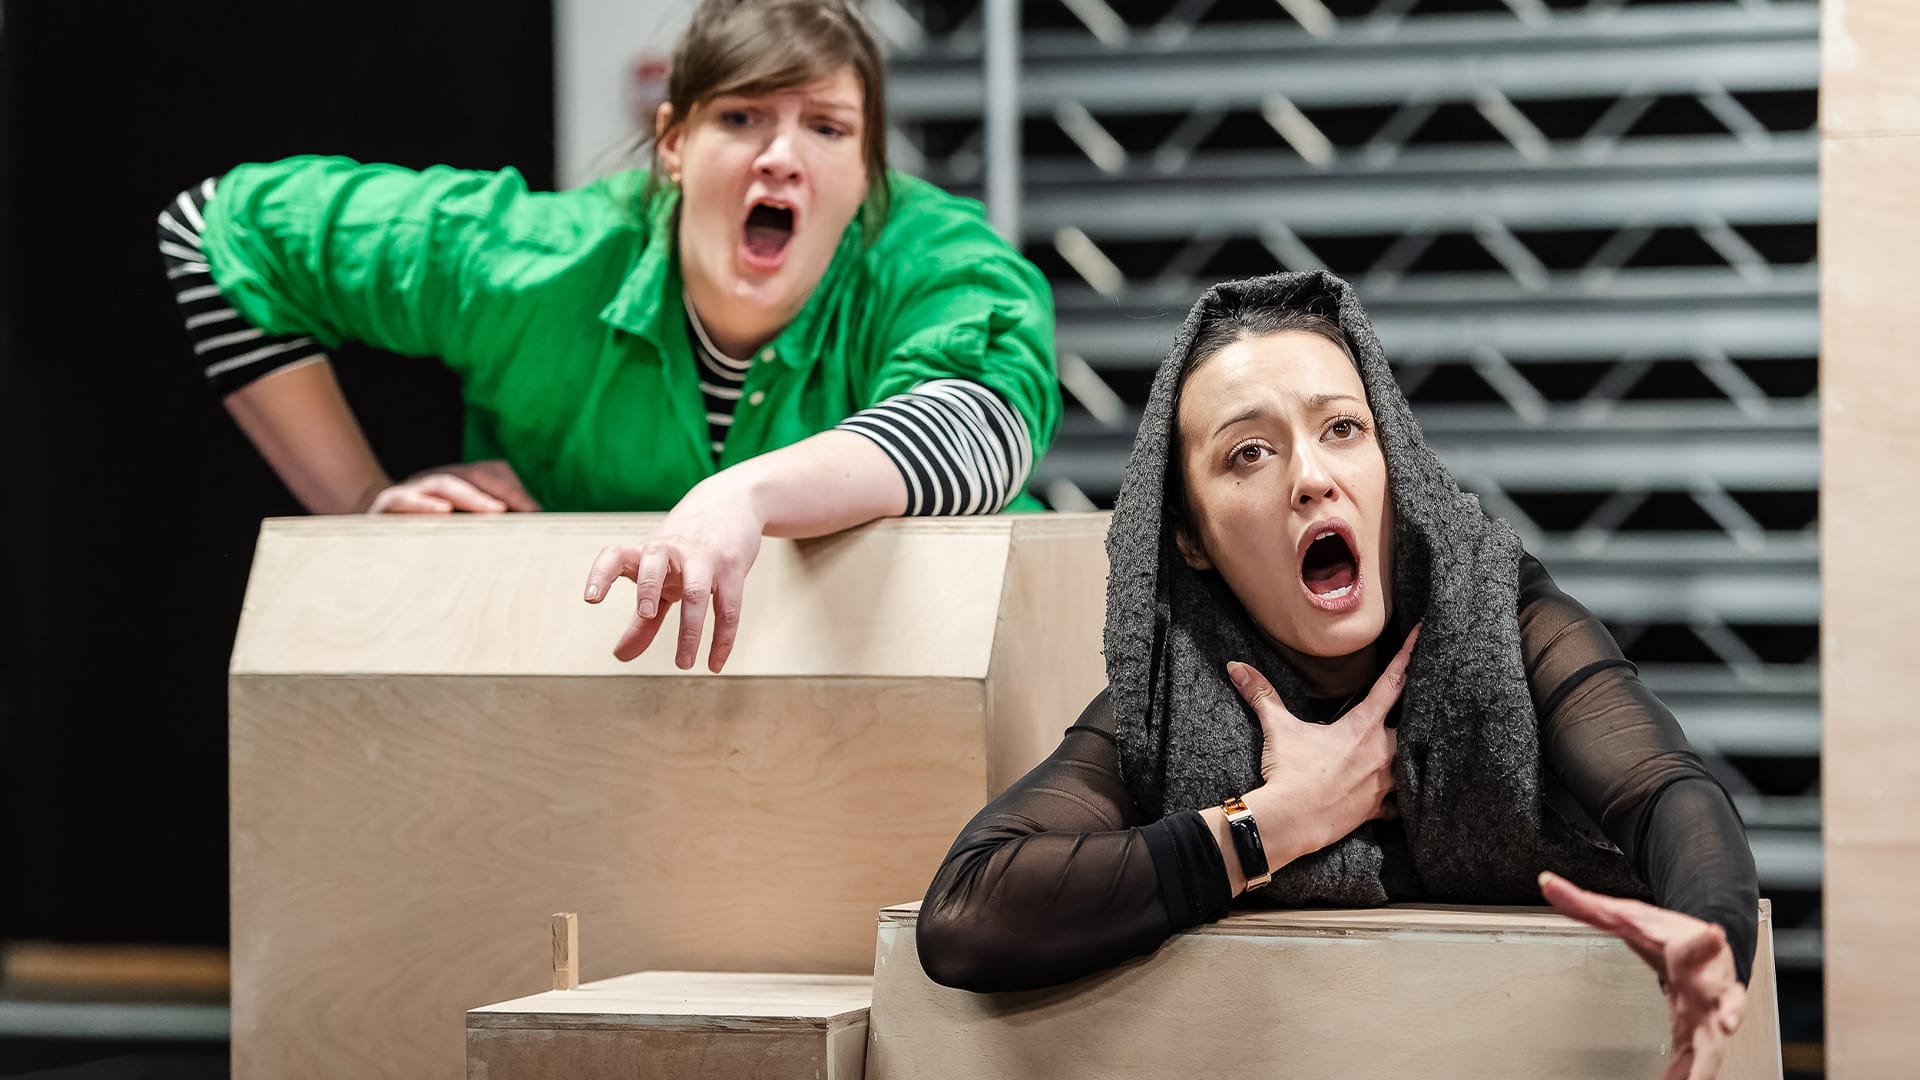 Two performers lean over low level cardboard boxes whilst singing.